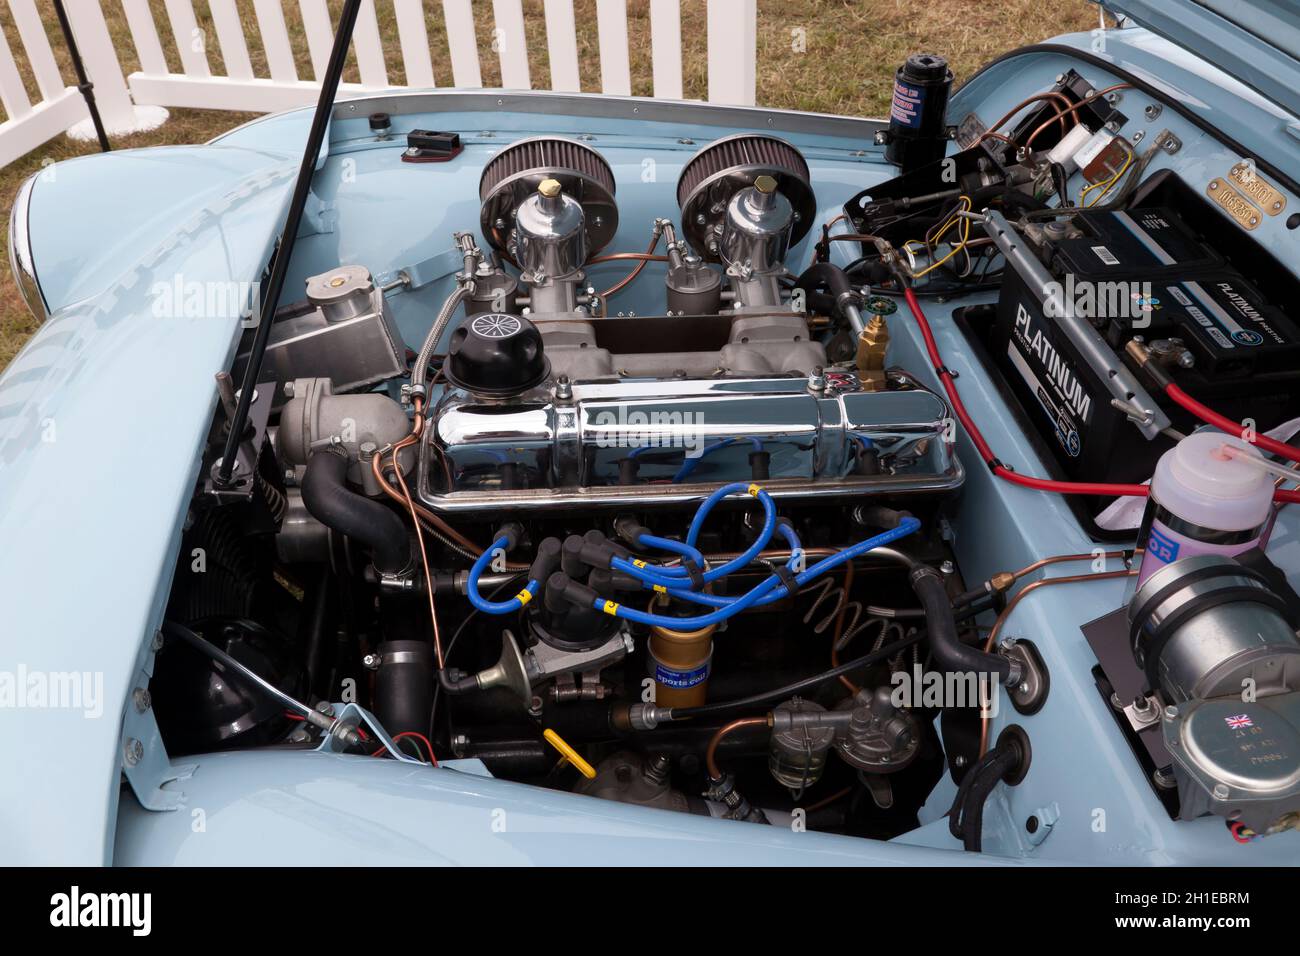 Close-up view of the Engine of a Blue, 1959, Triumph TR3, on display, at the 2021 London Classic Car Show Stock Photo